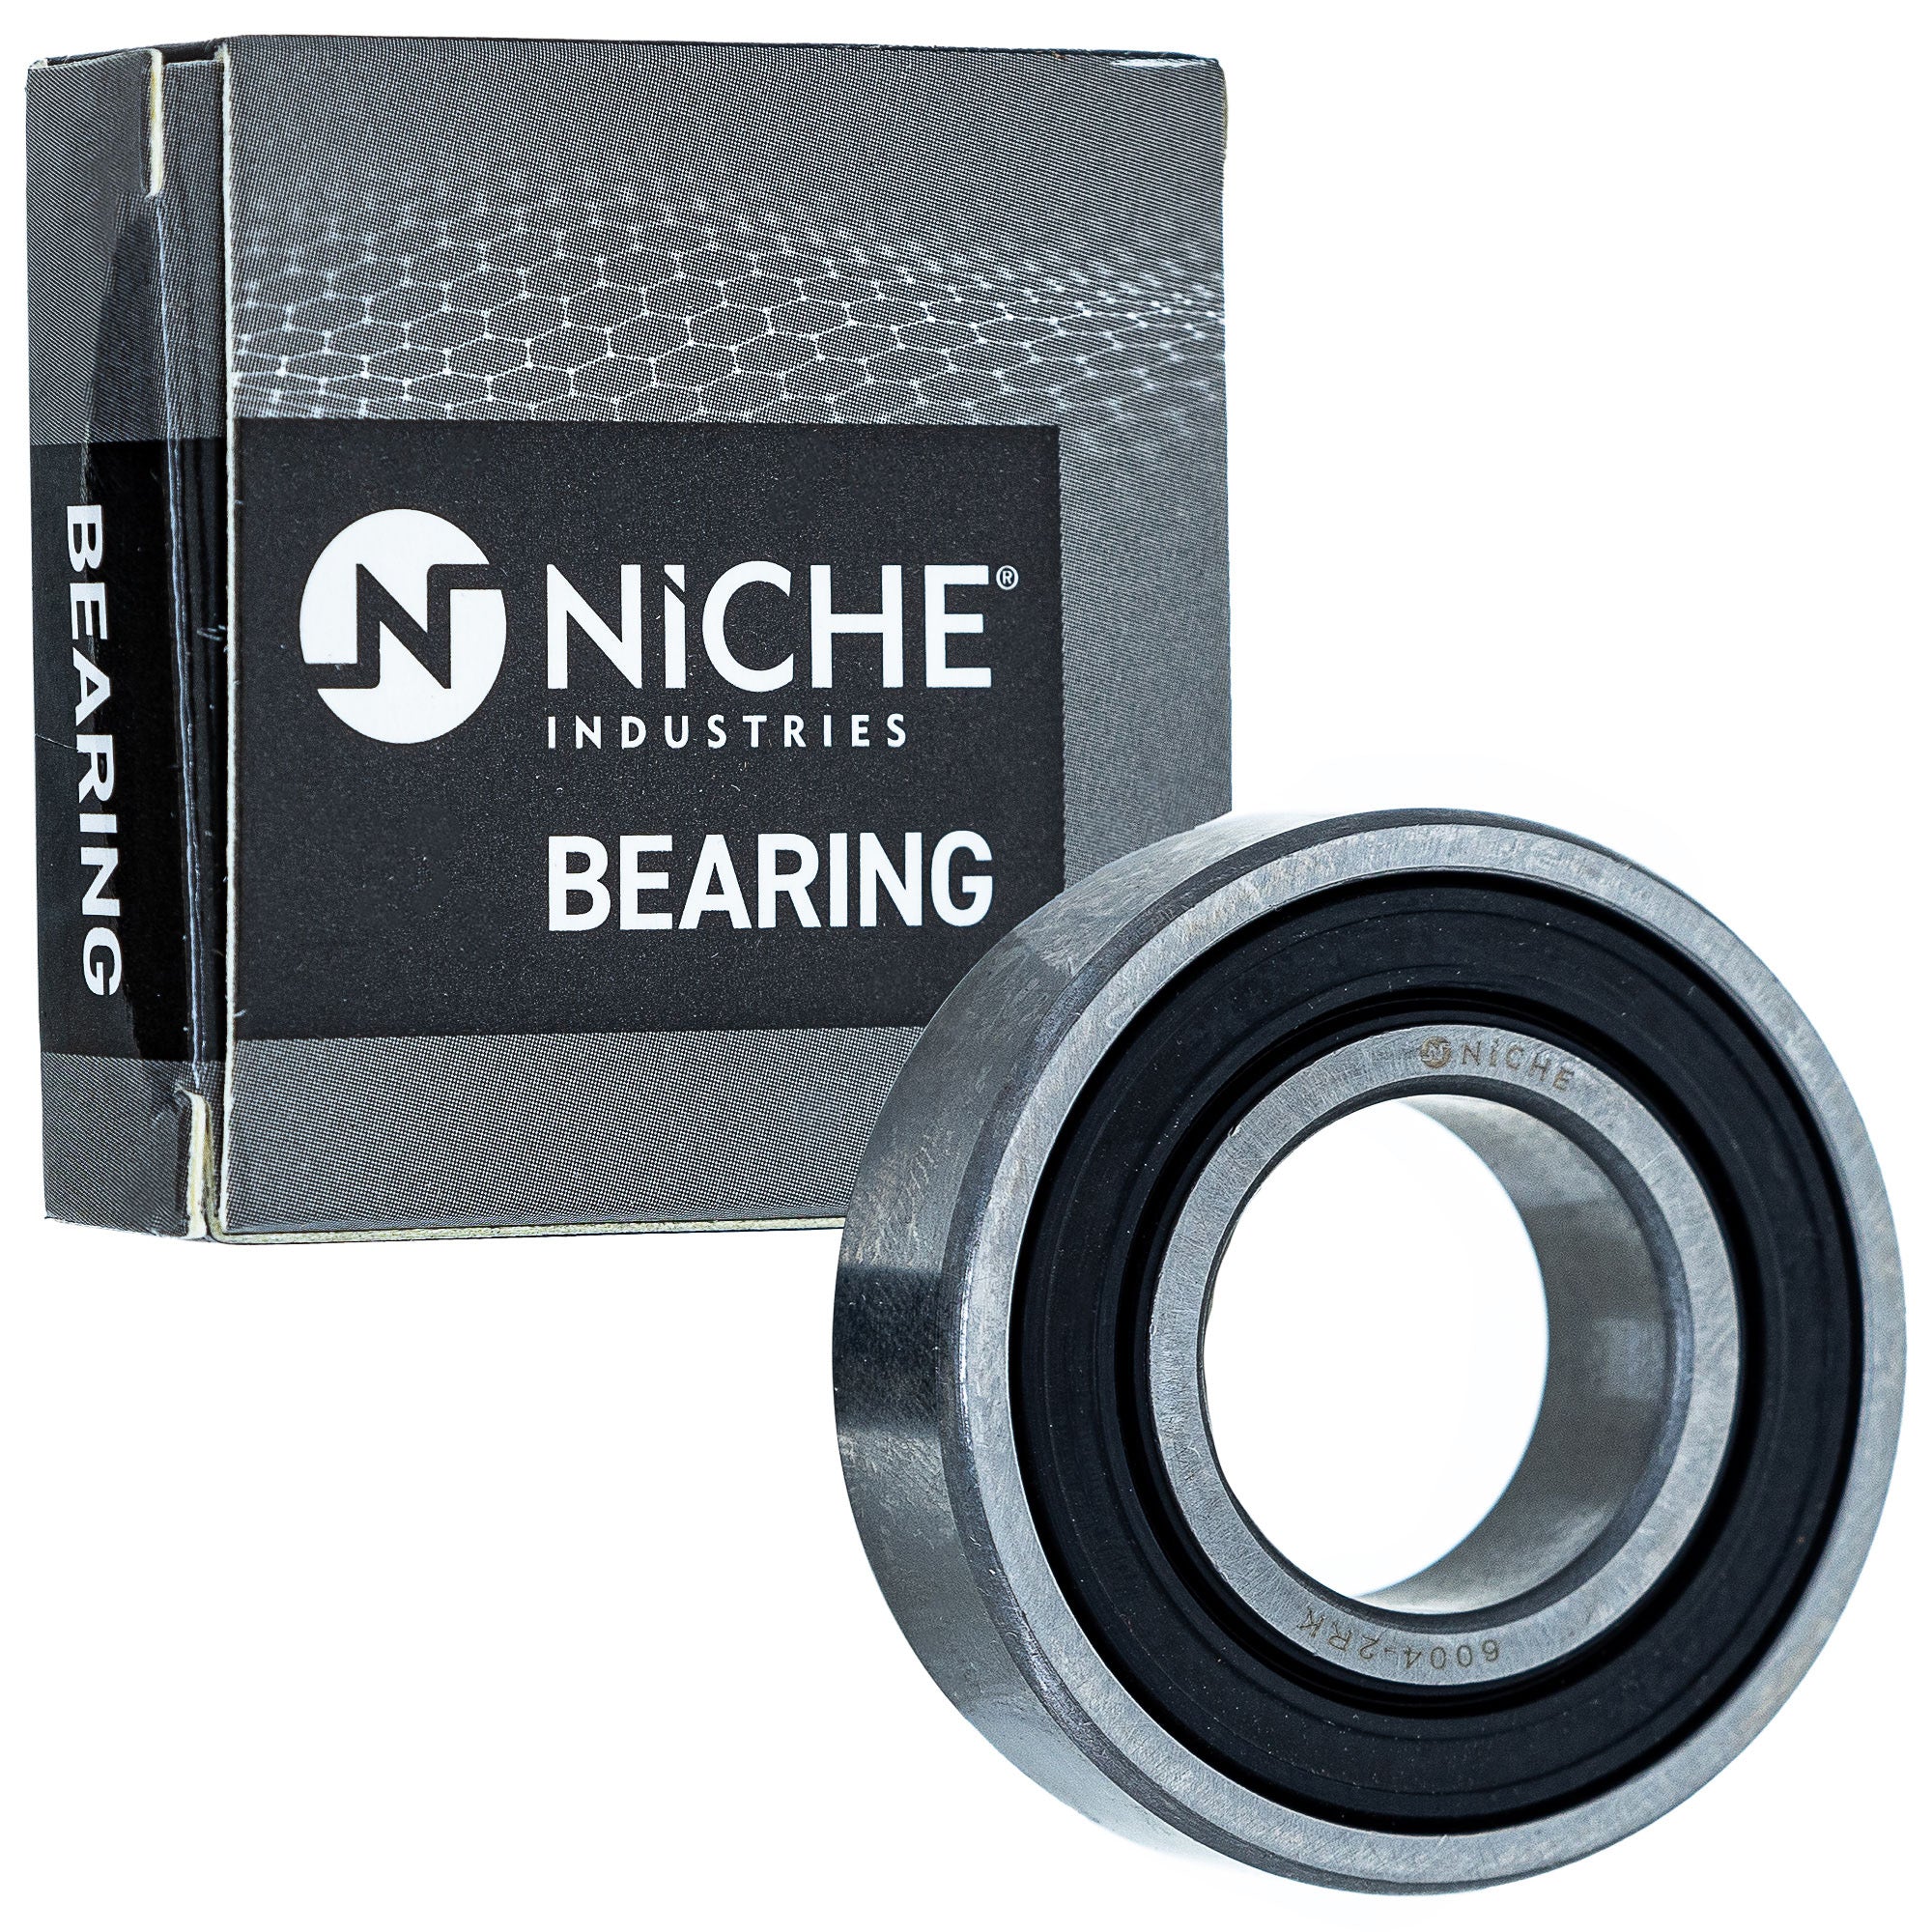 NICHE 519-CBB2295R Bearing 2-Pack for zOTHER VFR750R TRX200 Shadow